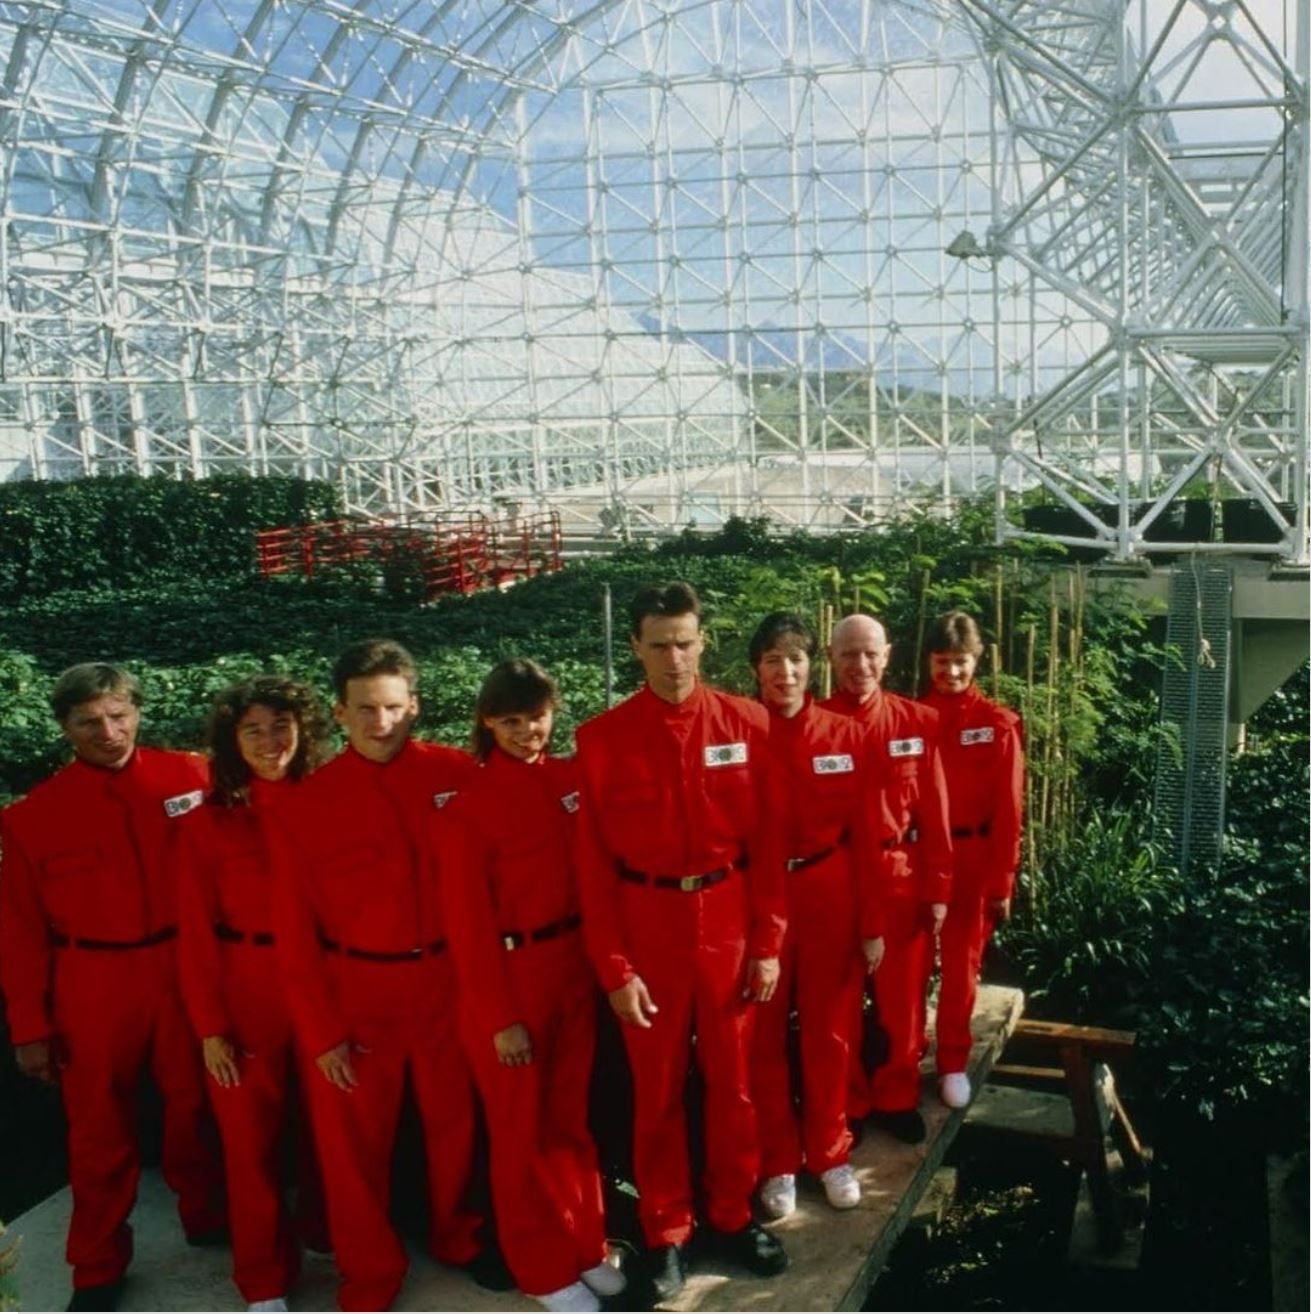 The 8 original Biospherians lasted for 2 years [experiment was cut short] - Biosphere 2 1991